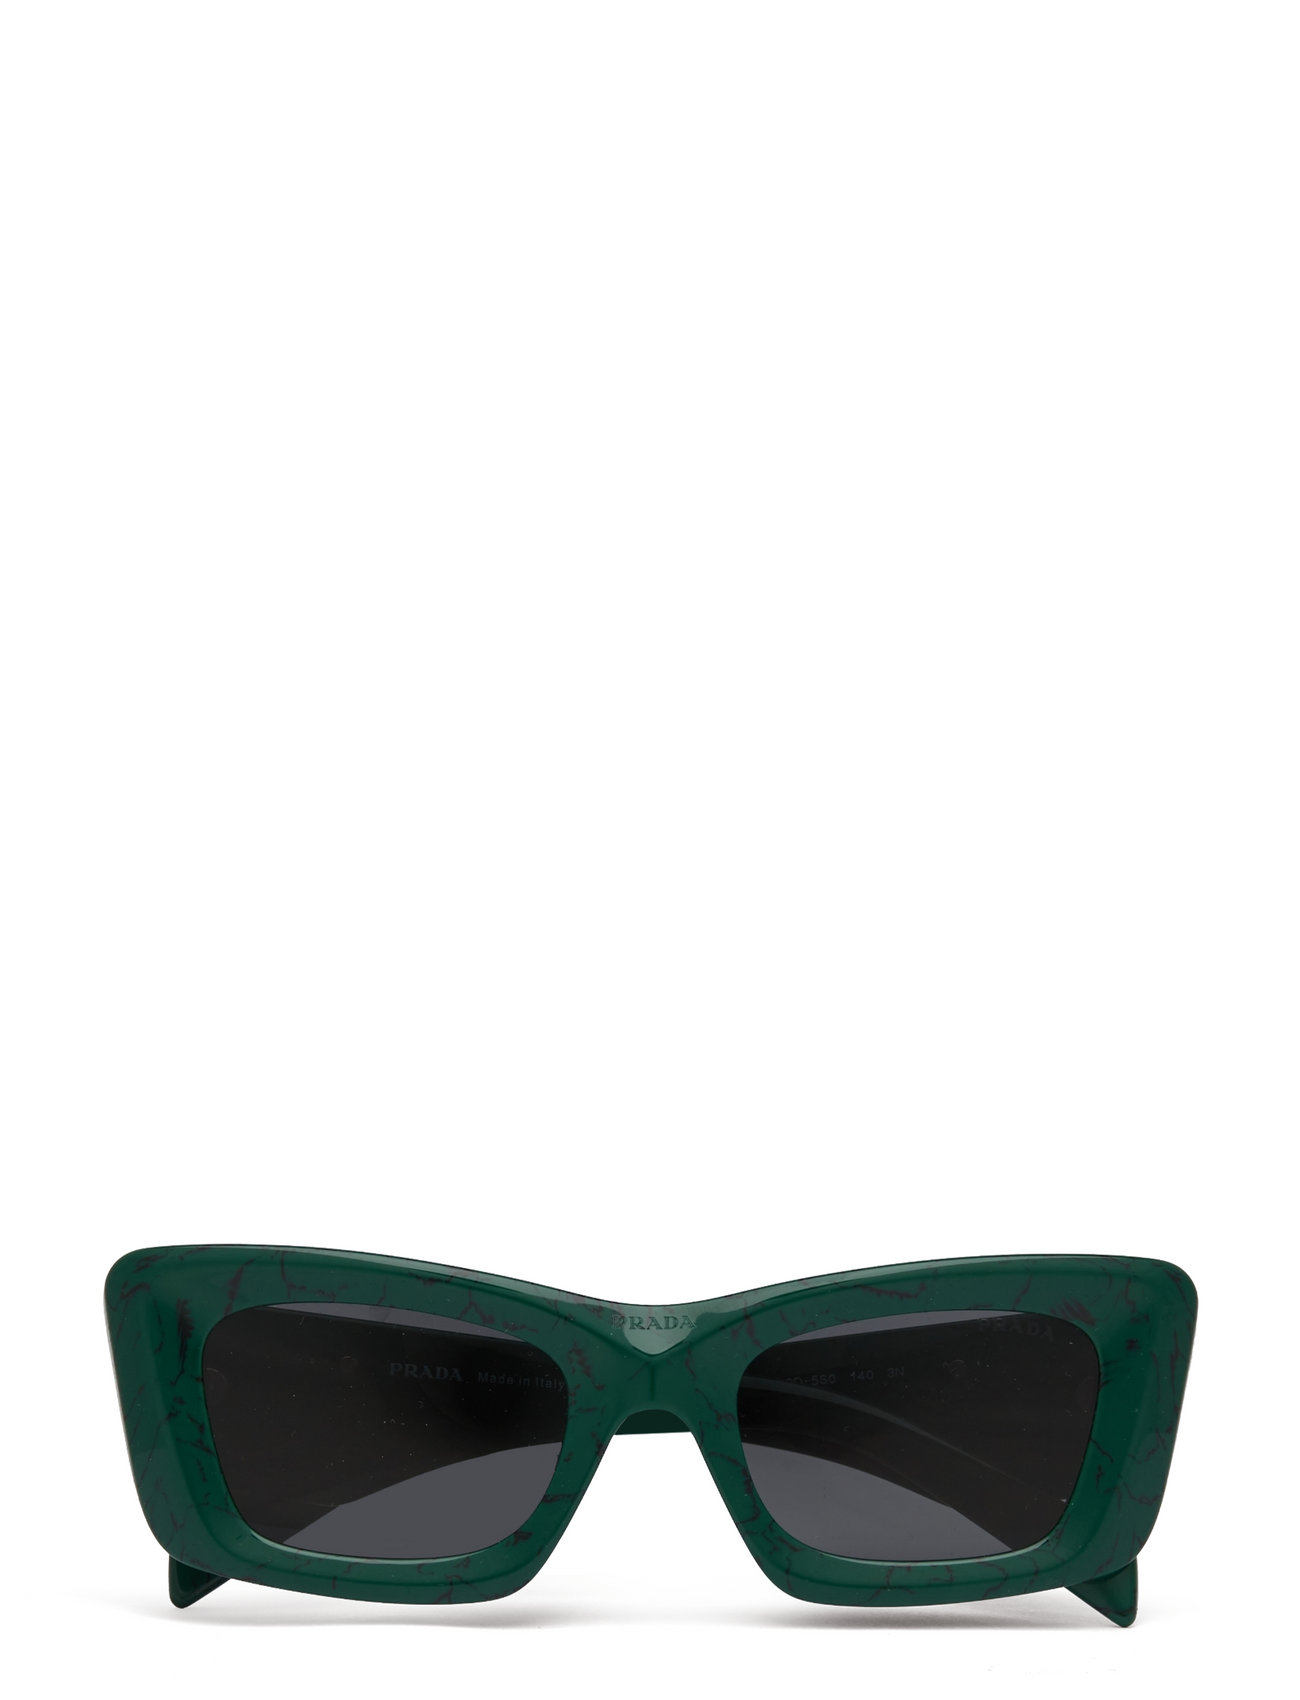  Prada Women's 13ZS Square Sunglasses, Green Marble/Dark Grey,  One Size : Clothing, Shoes & Jewelry